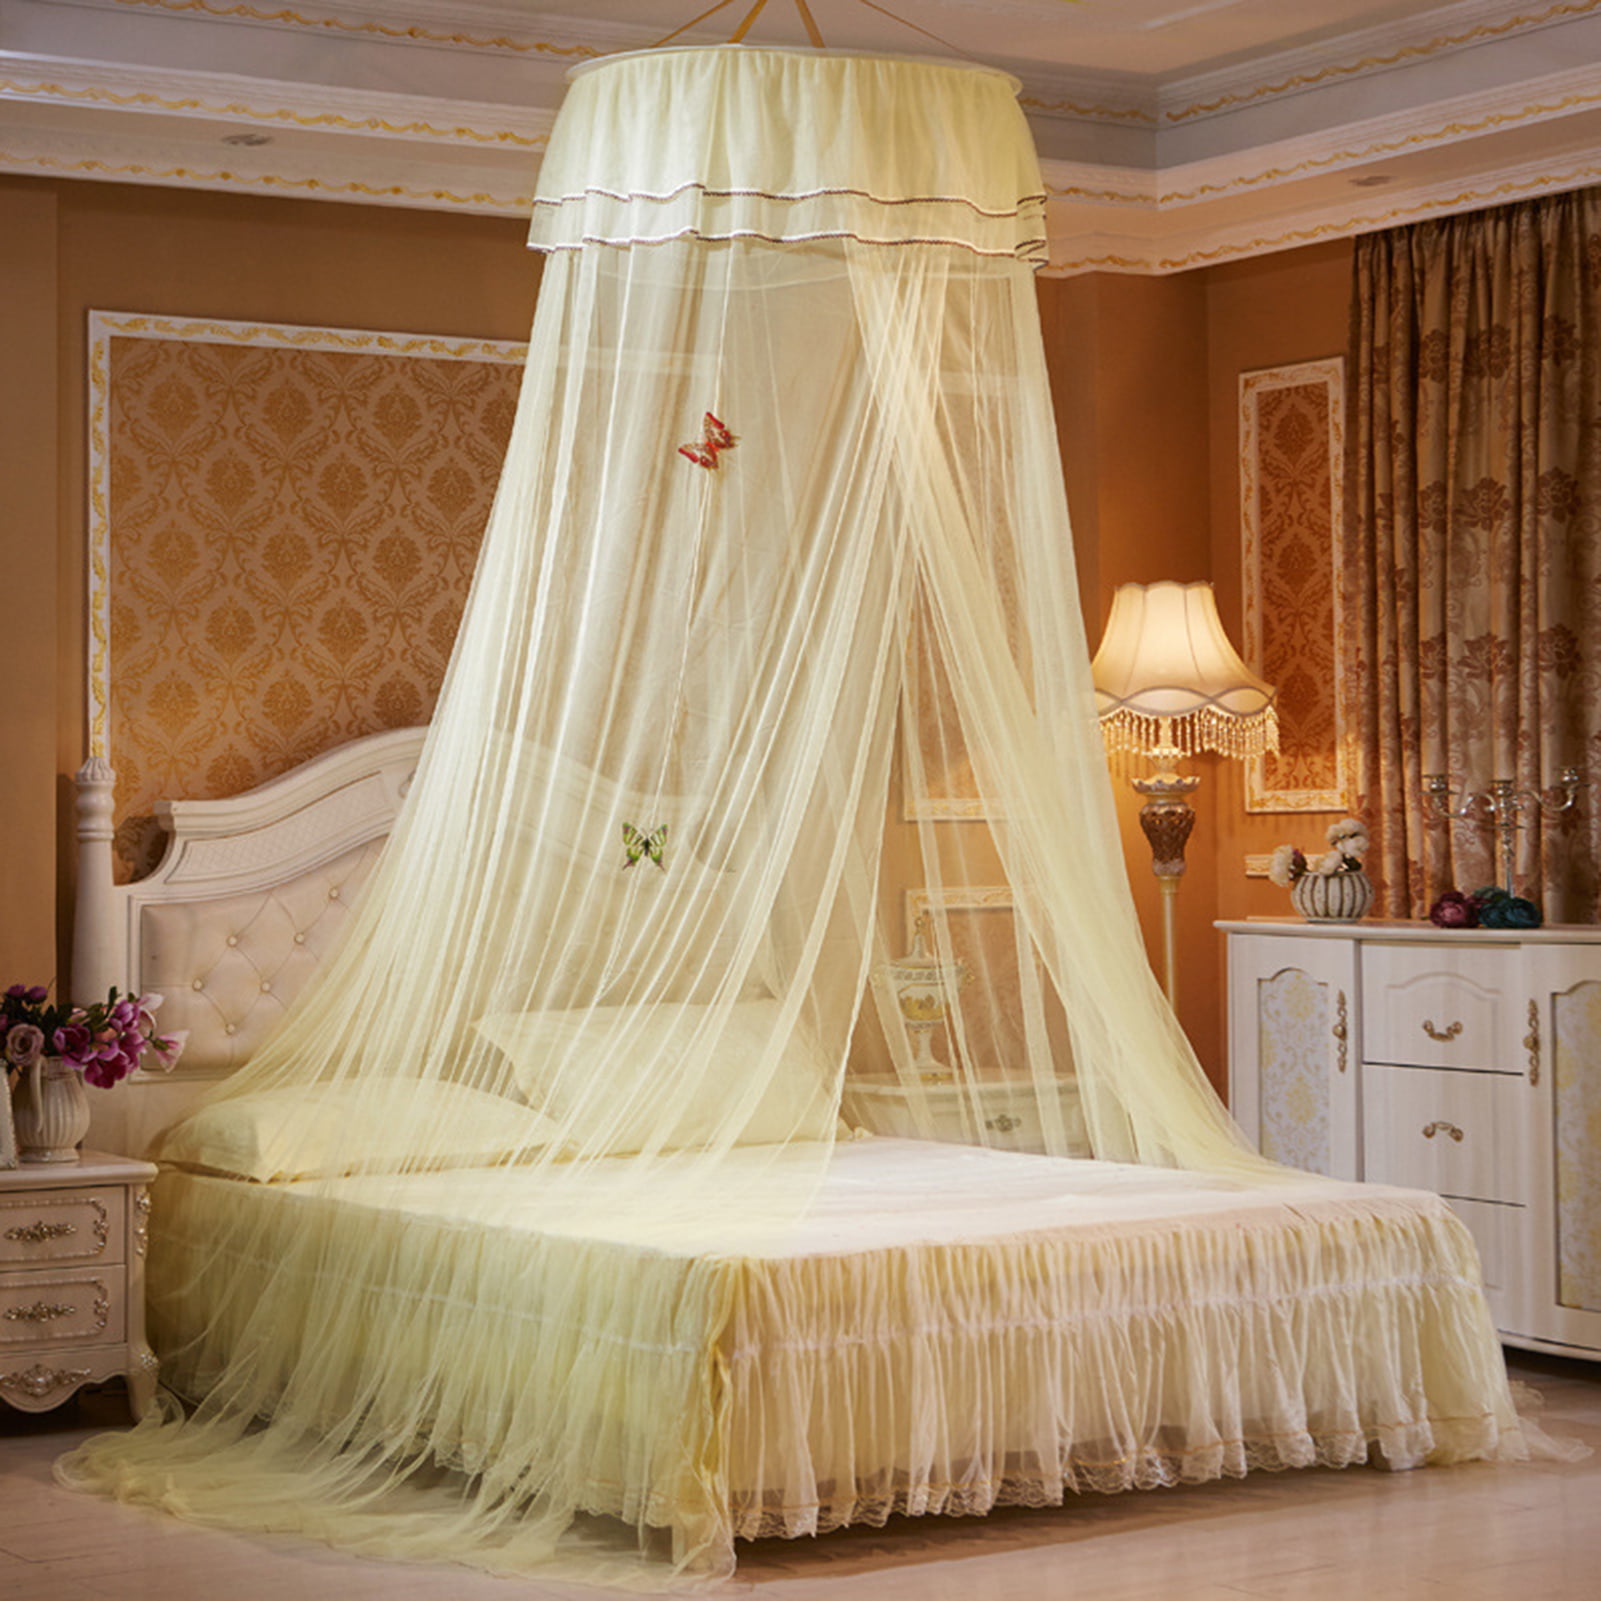 Details about   Fdit Luxury Princess Four Corner Post Bed Curtain Canopy Netting Mosquito Net Be 